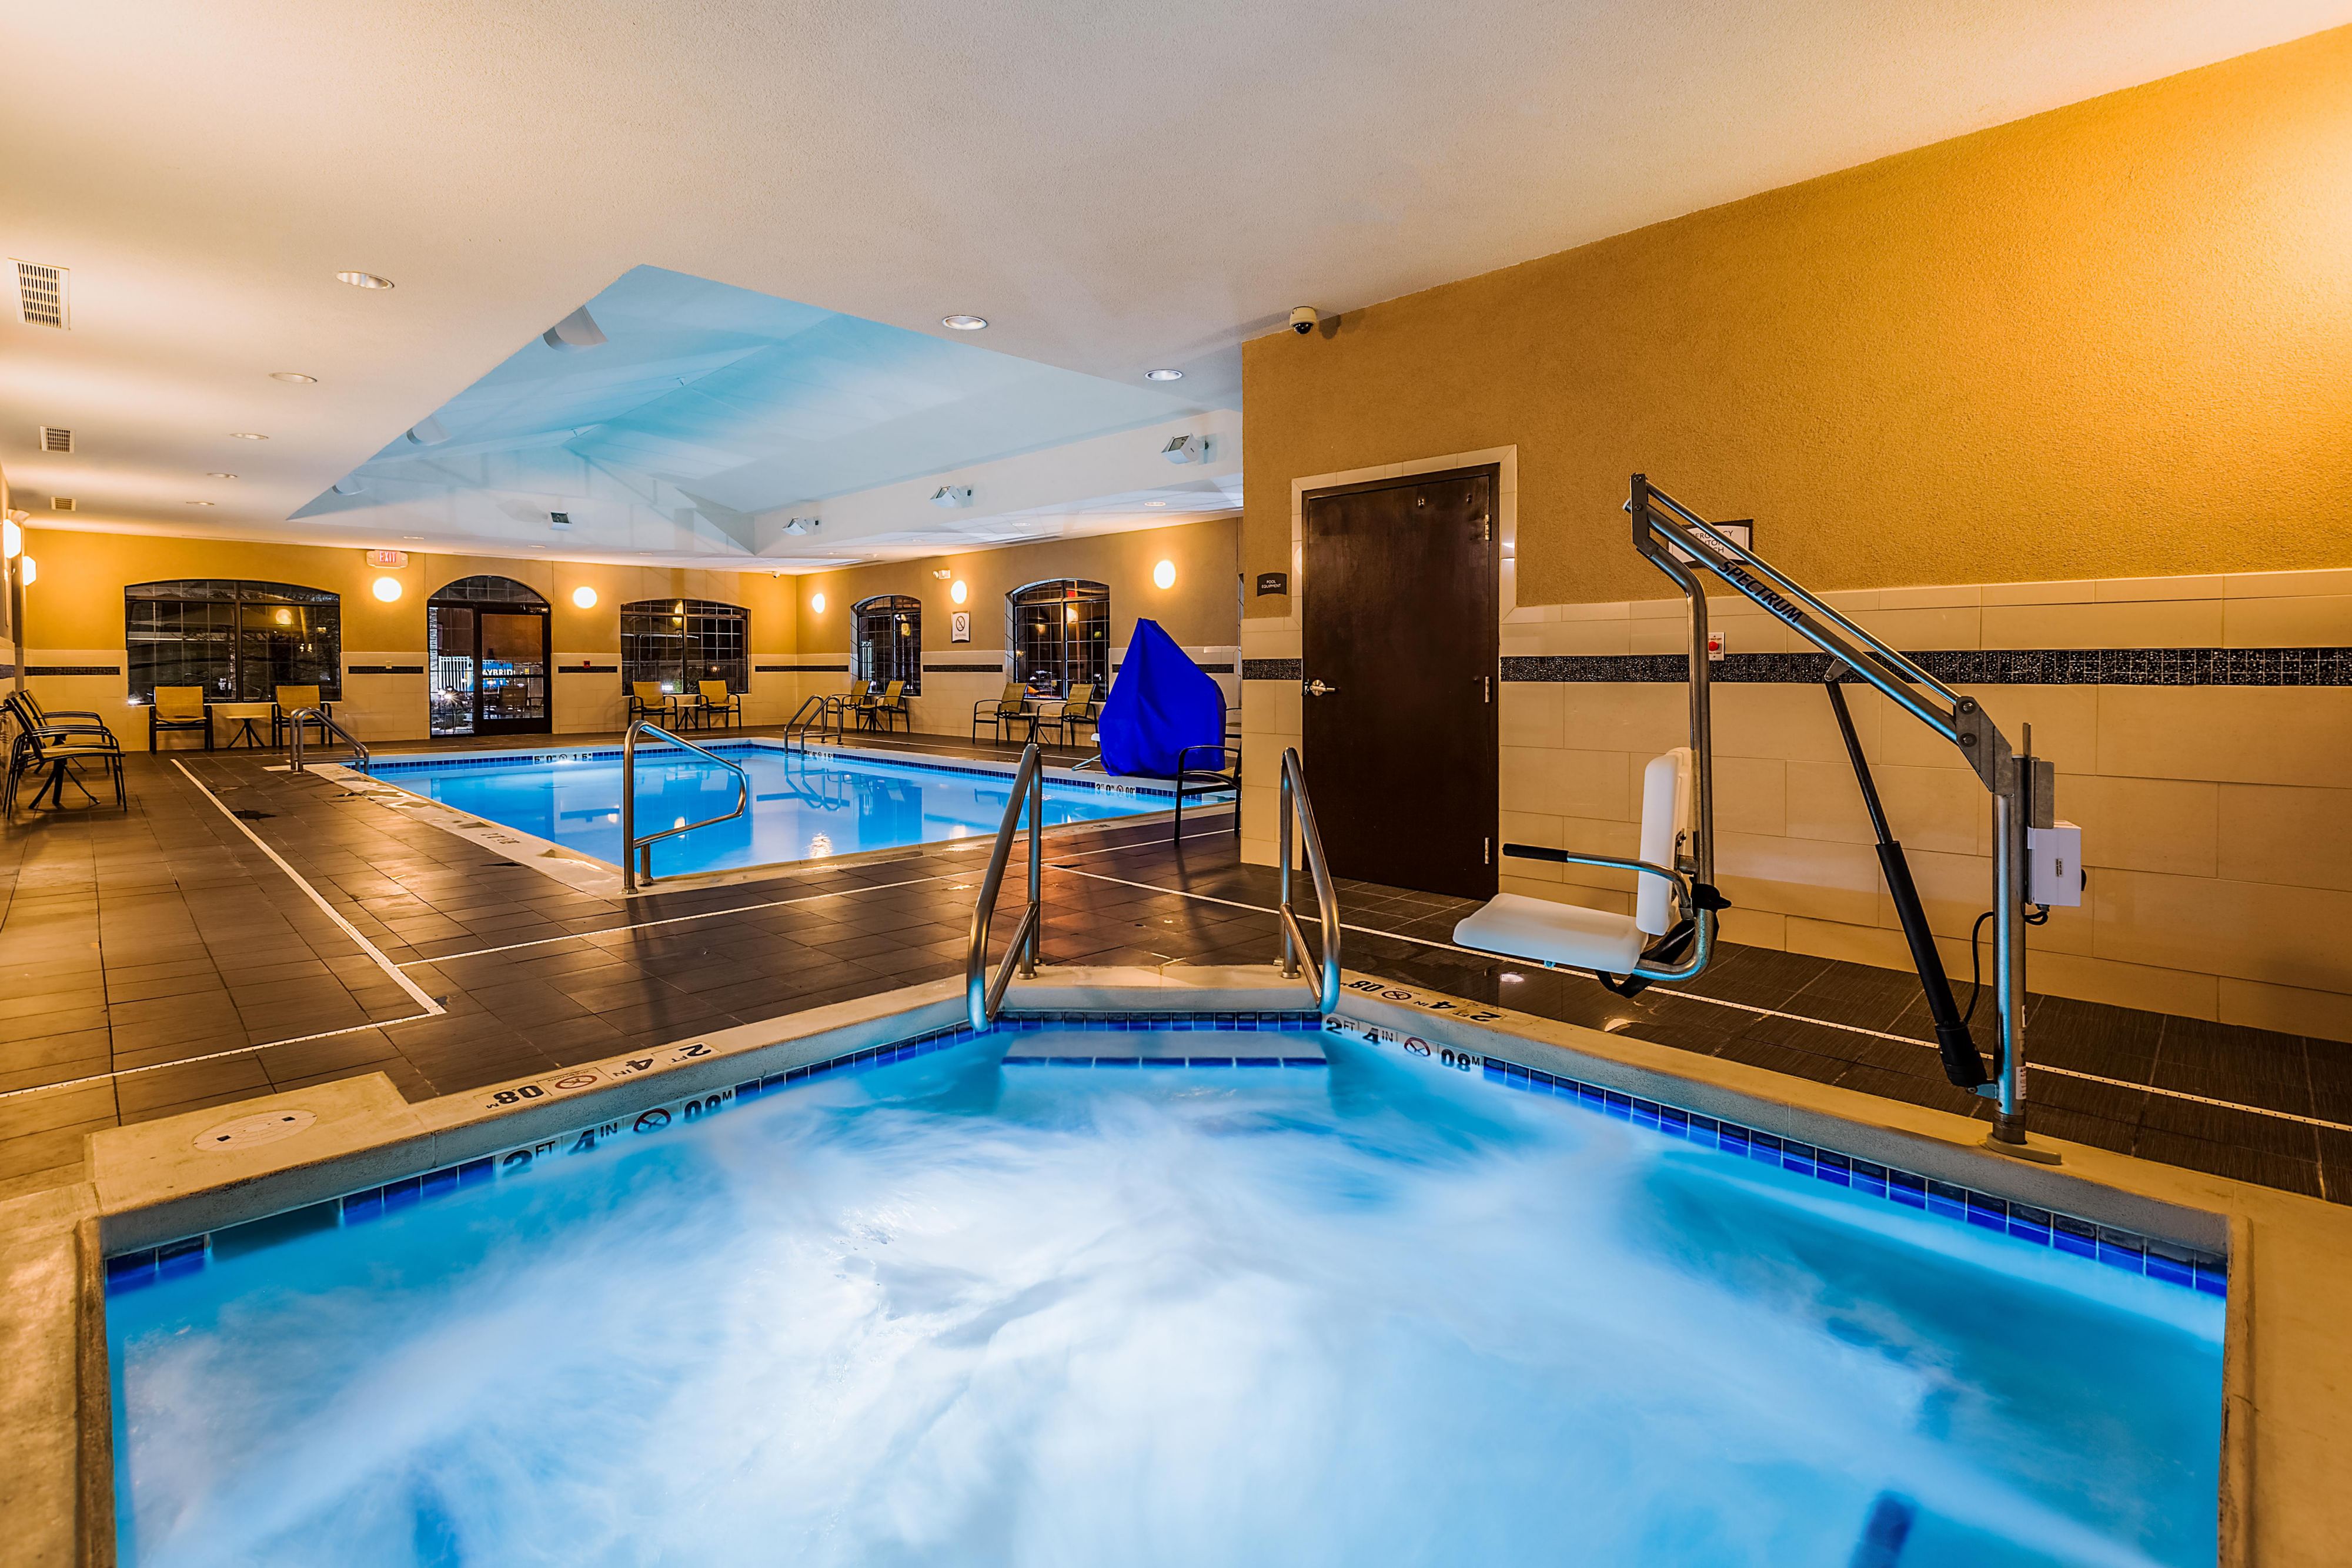 Our indoor pool and hot tub are open year round for your relaxation and enjoyment.